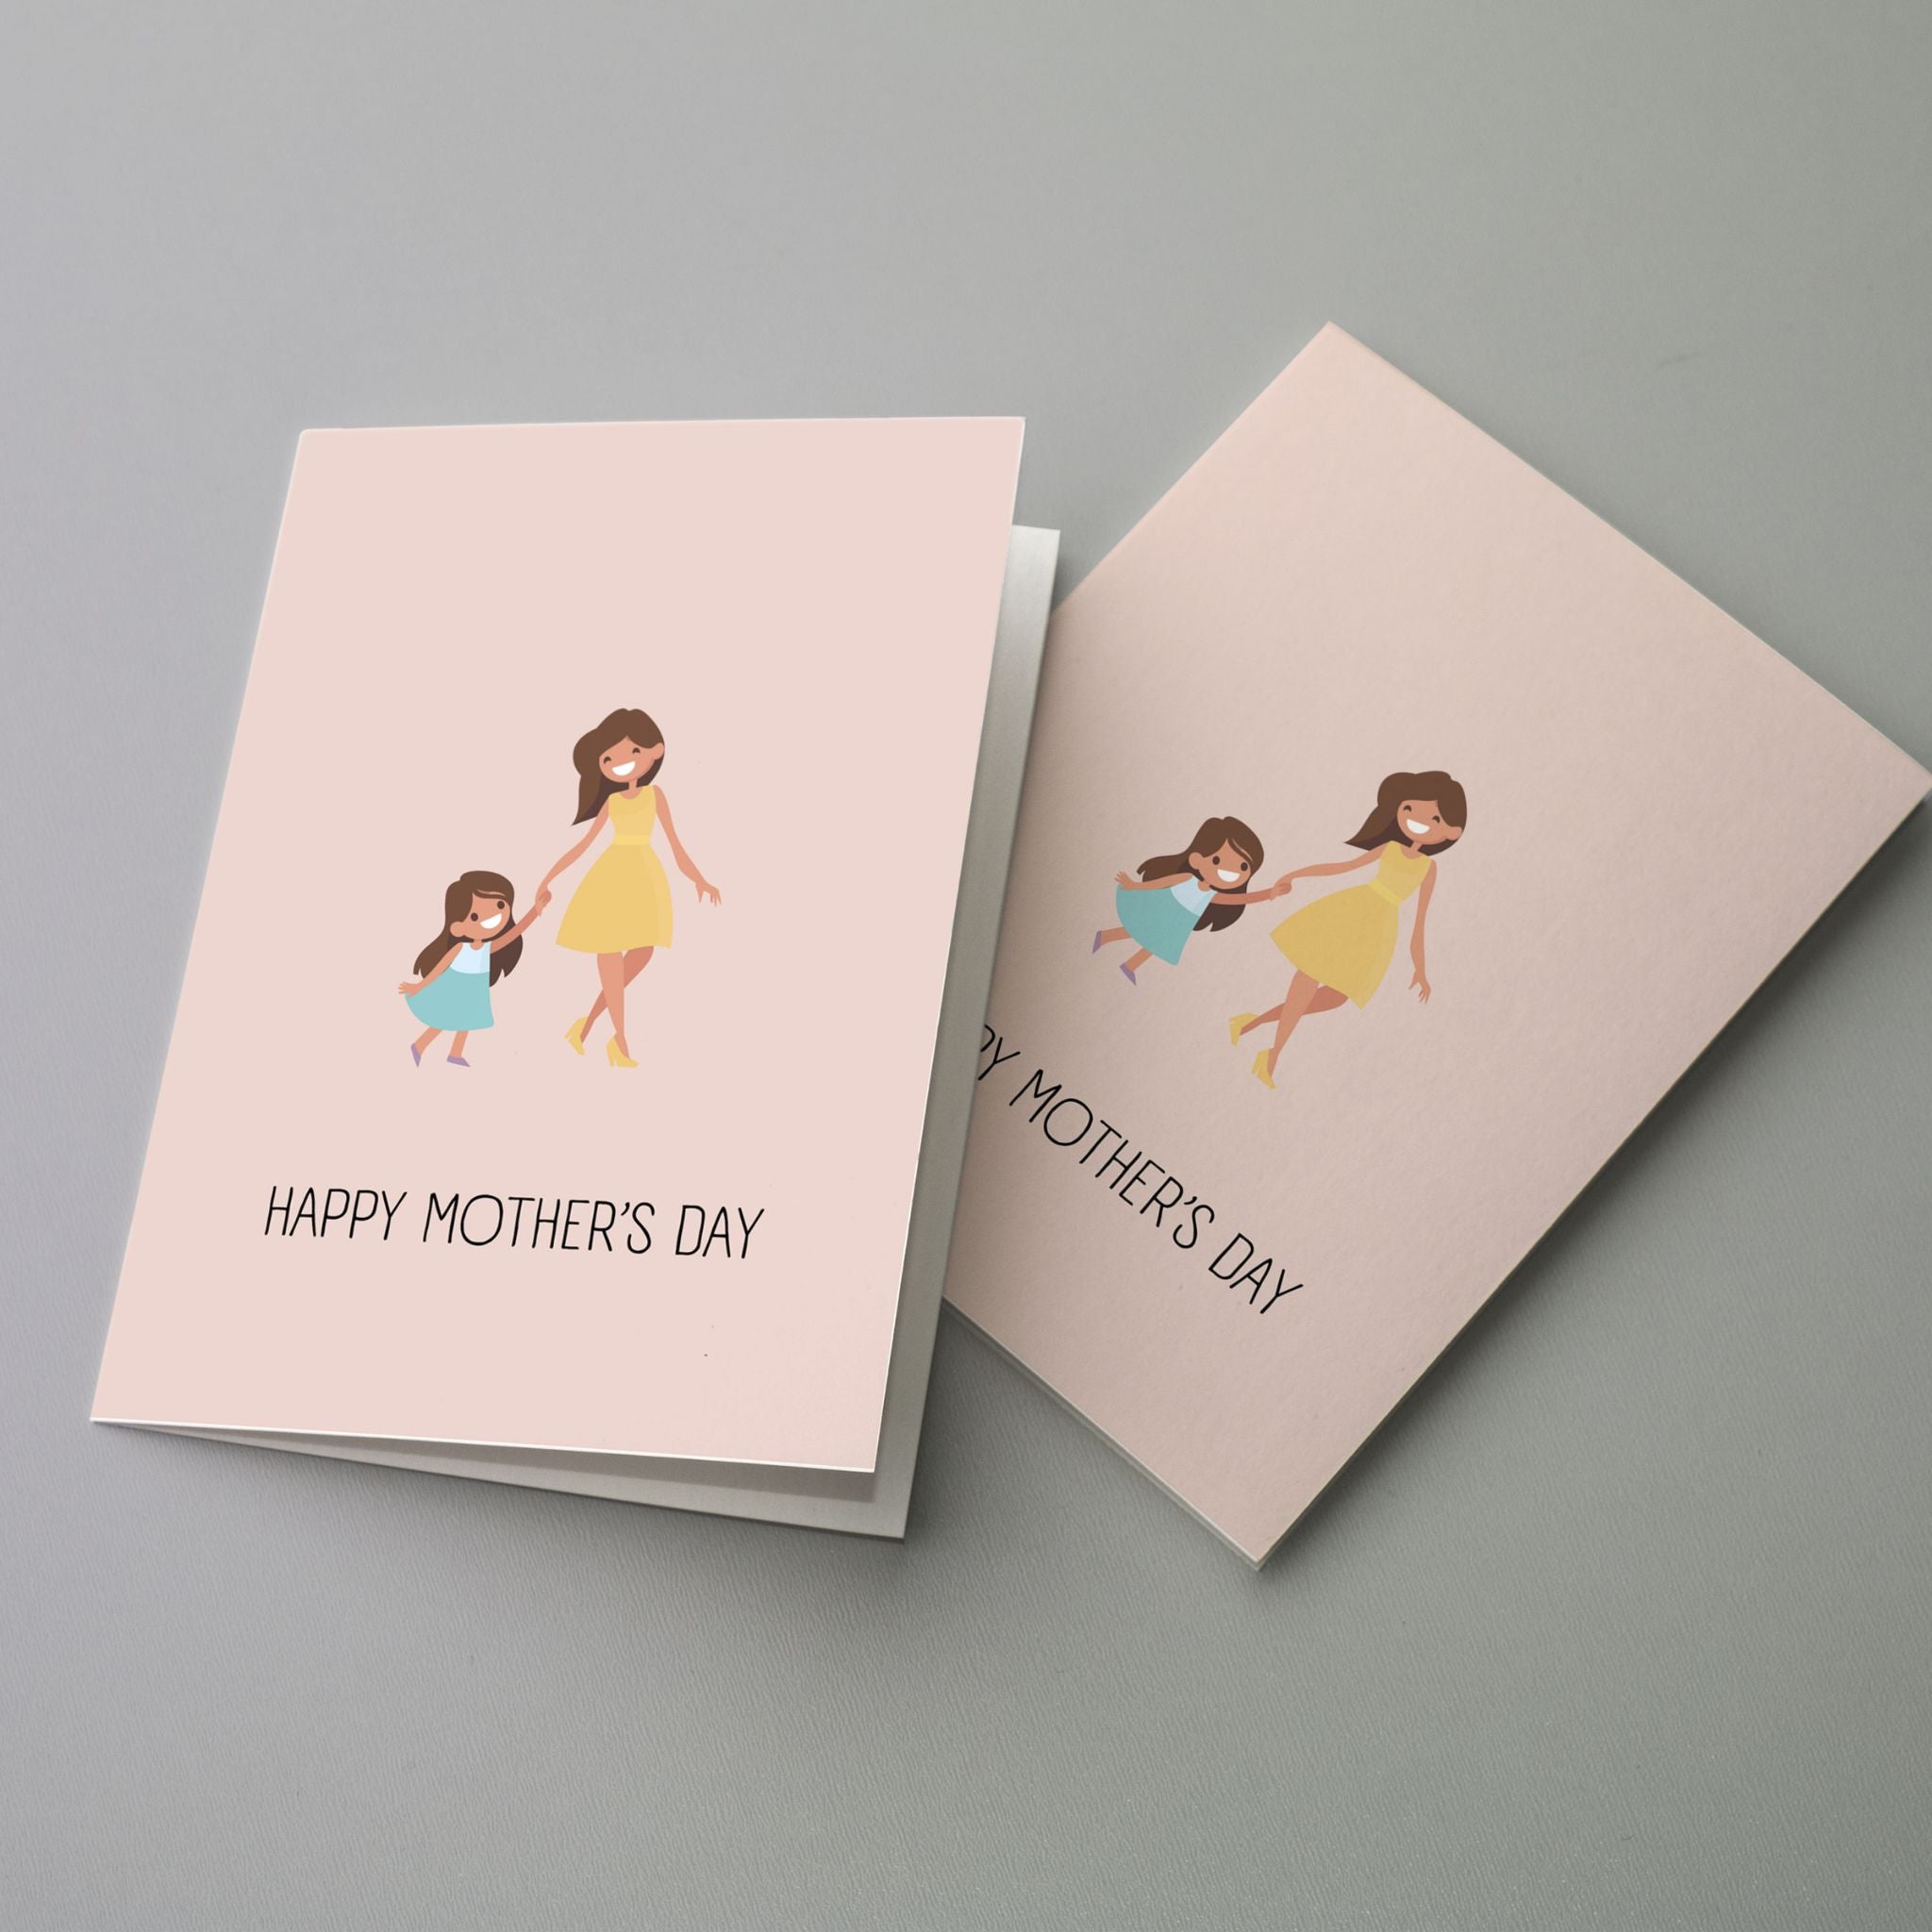 Greeting Cards for All Occassions